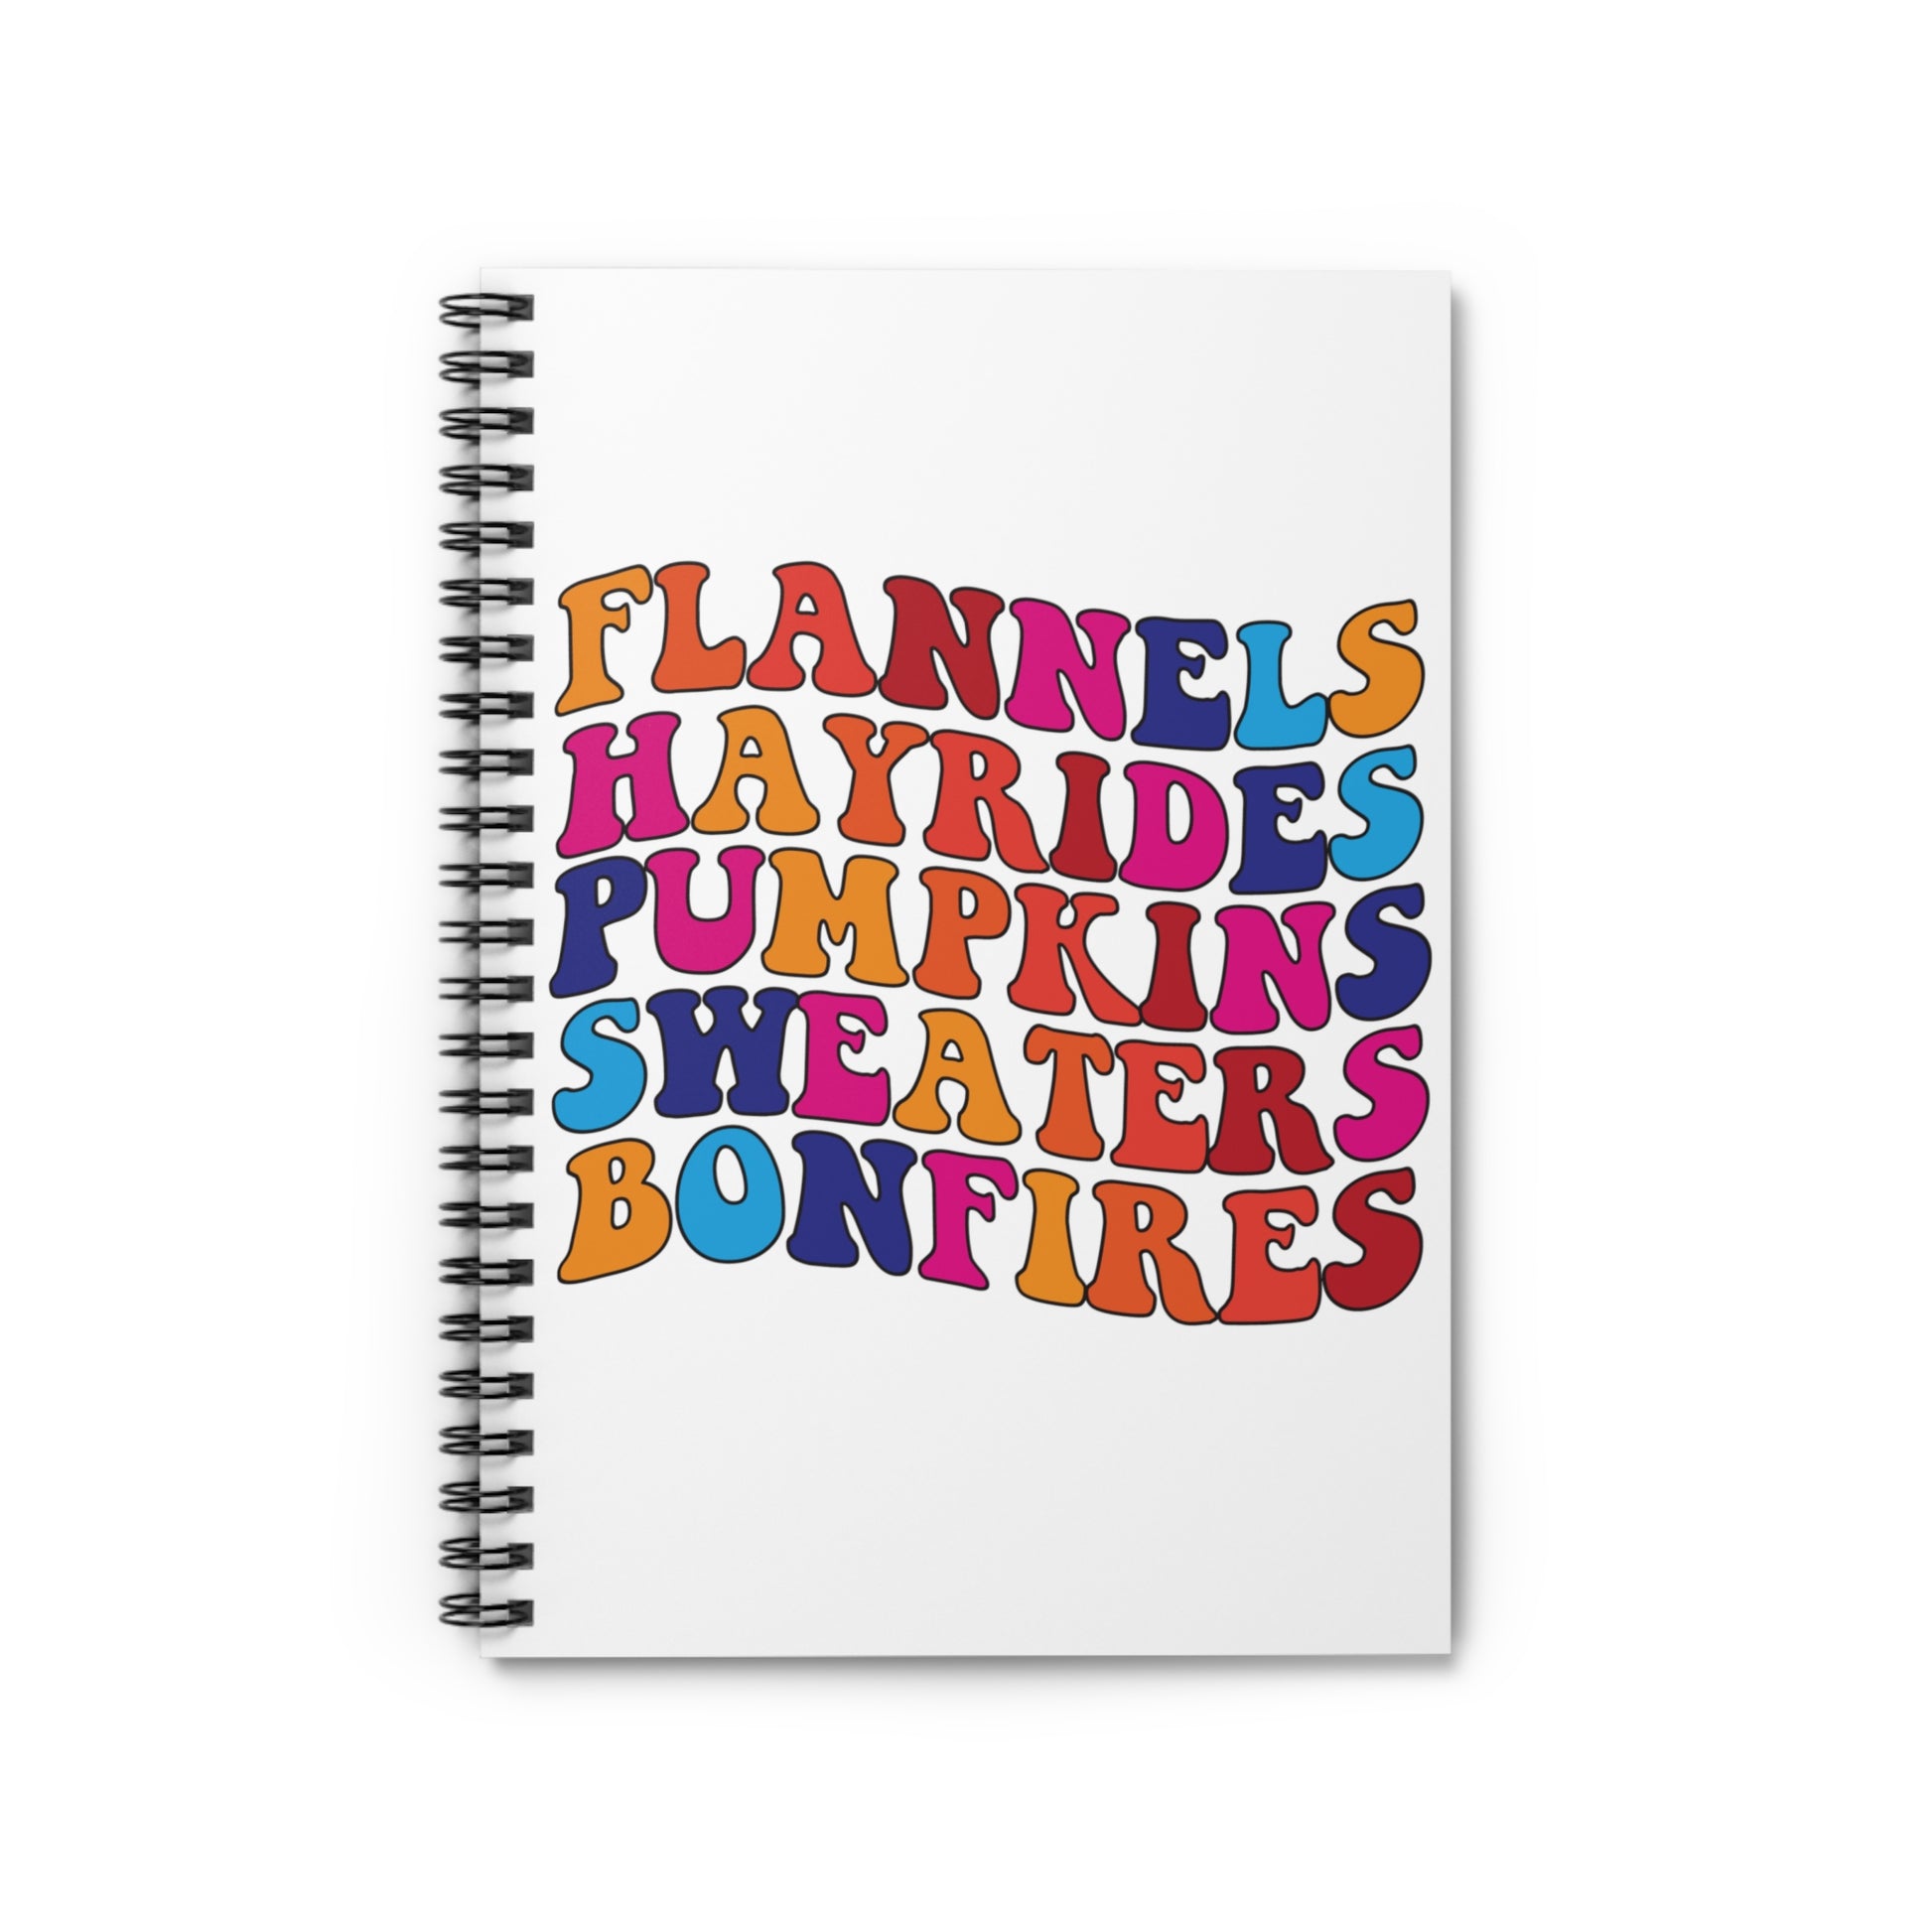 Flannels & Hayrides: Spiral Notebook - Log Books - Journals - Diaries - and More Custom Printed by TheGlassyLass